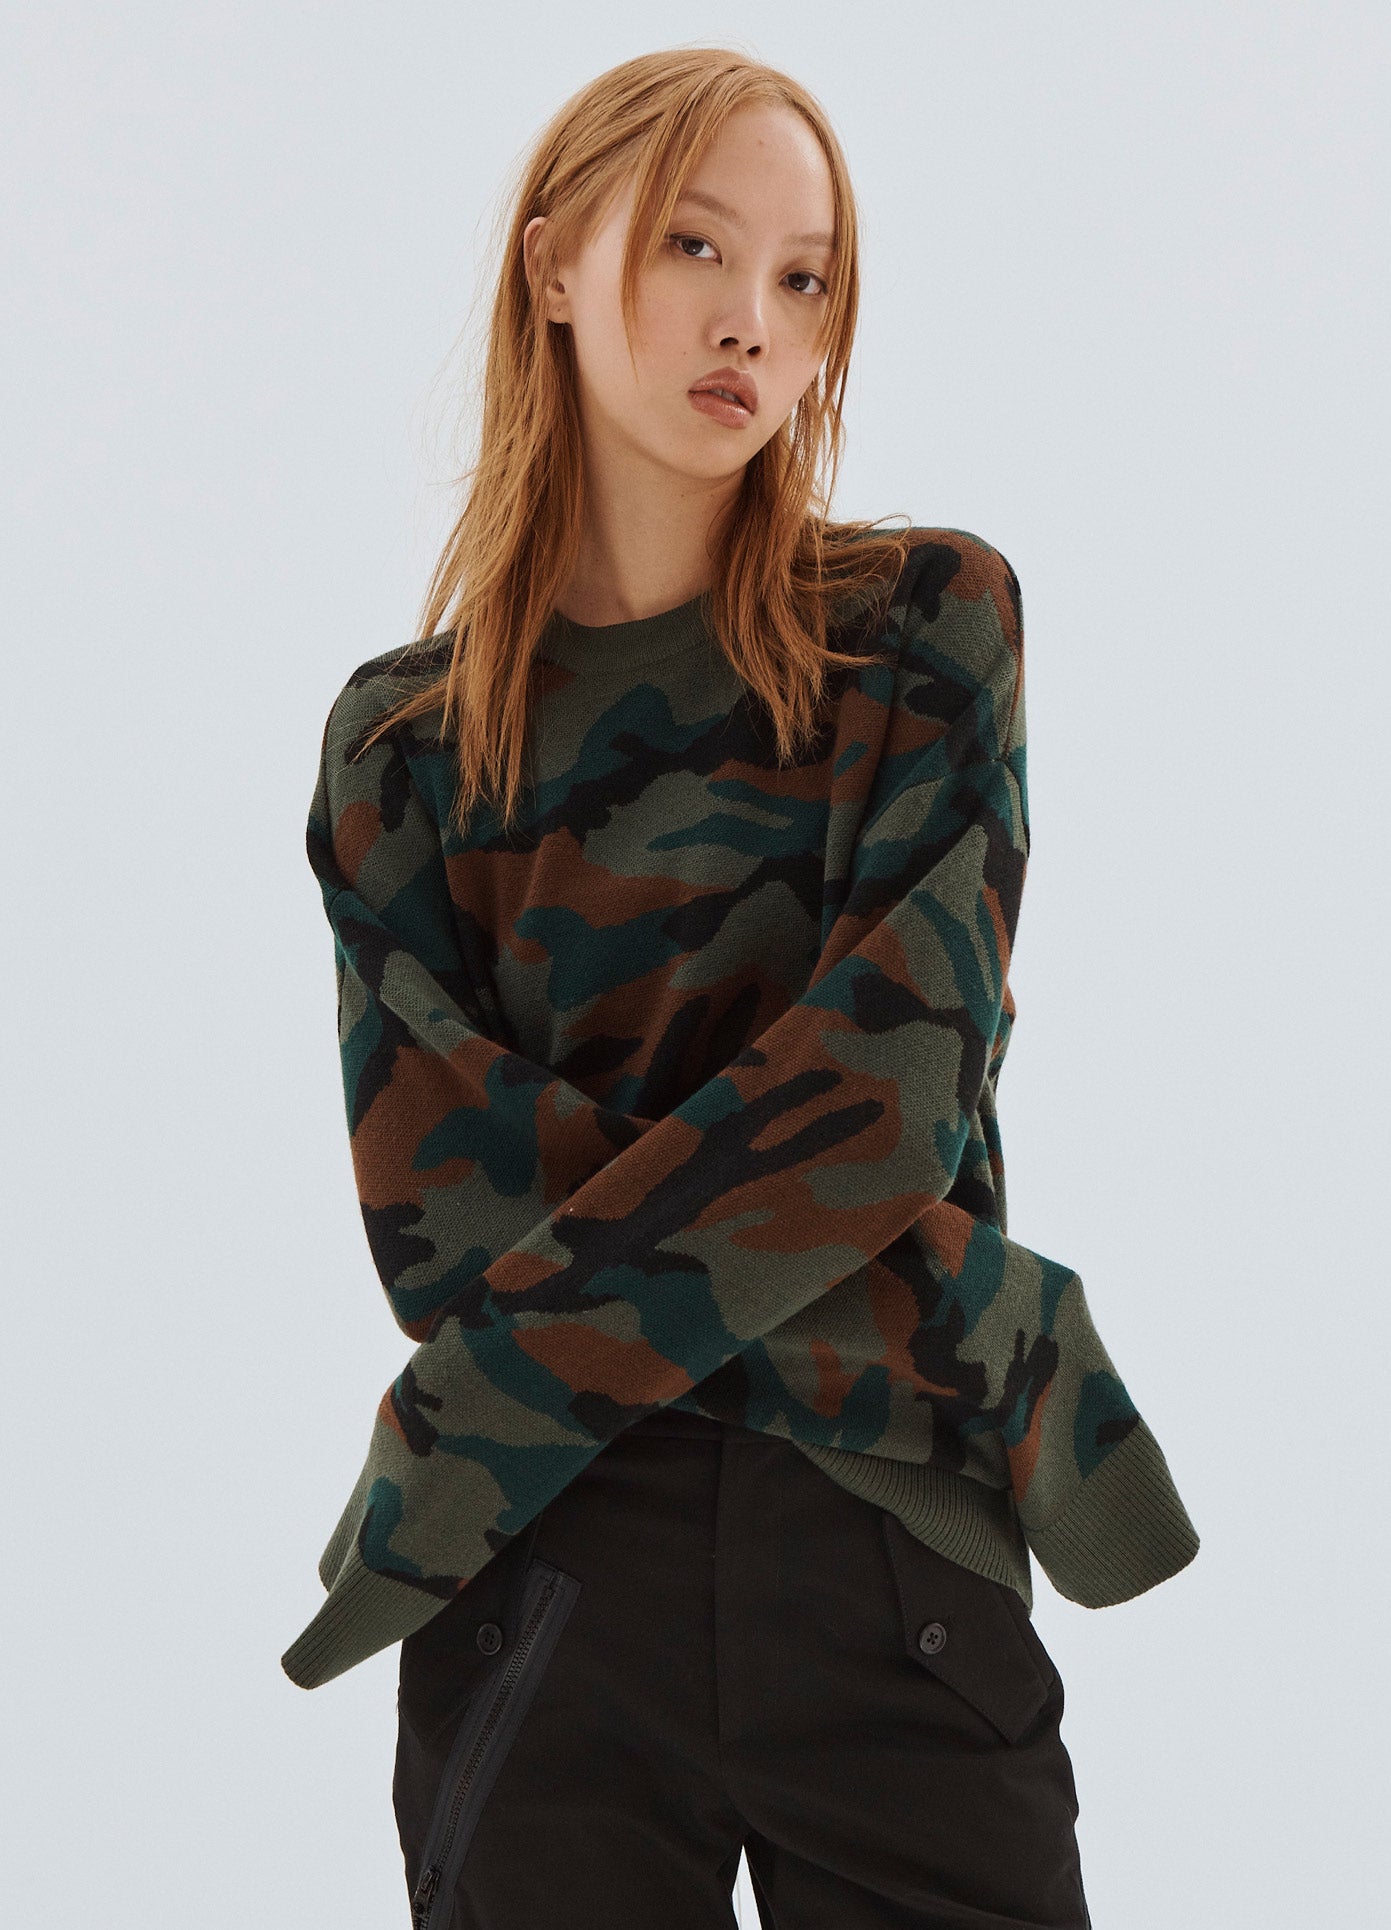 MONSE Boxy Camo Laced Up Sweater on Model with Arms Crossed Front View